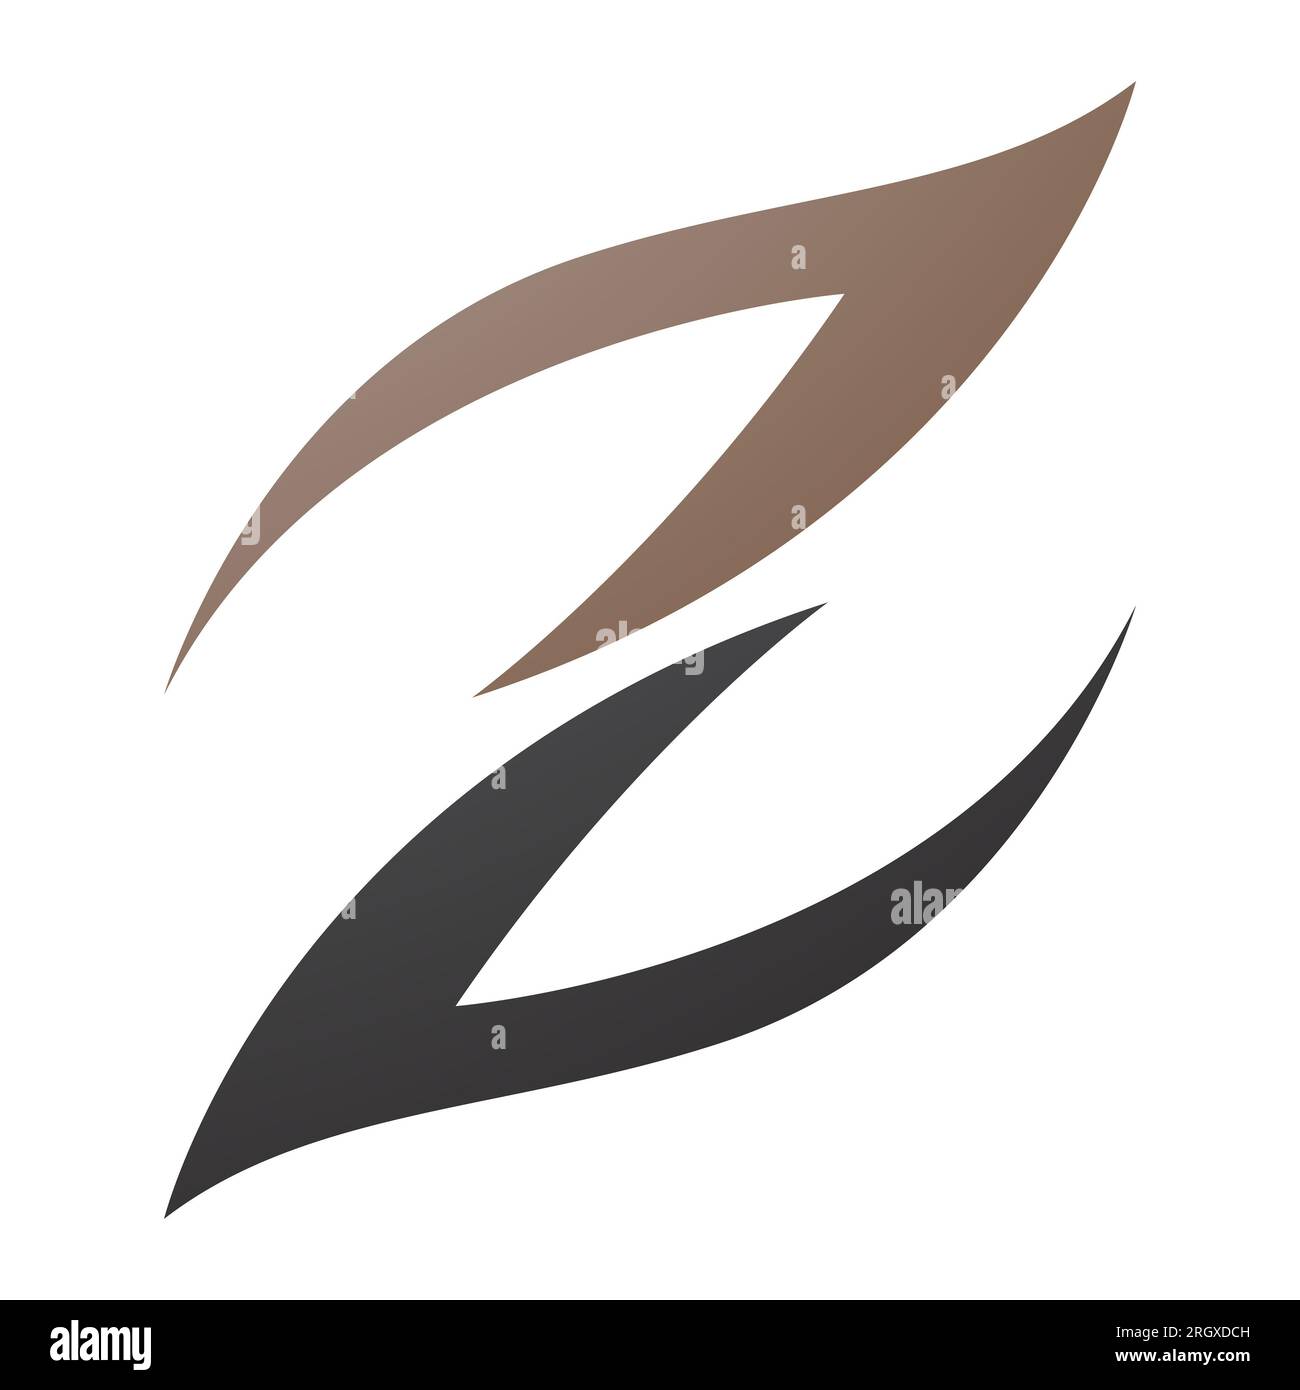 Brown and Black Fire Shaped Letter Z Icon on a White Background Stock Photo